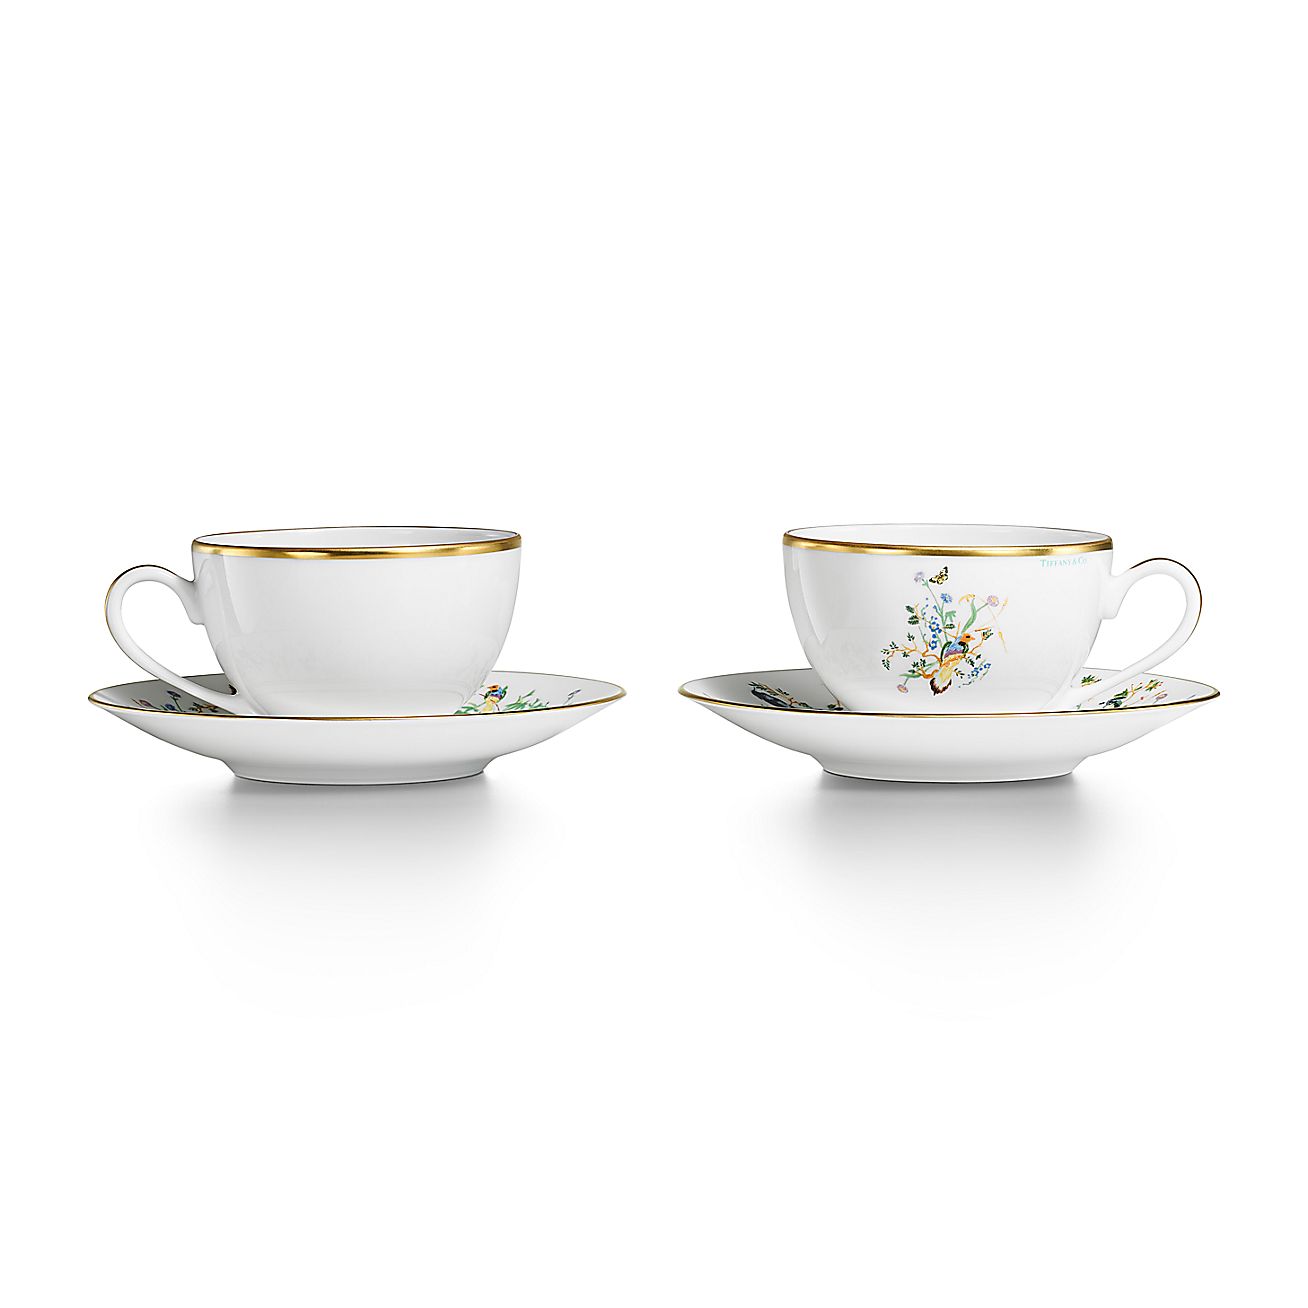 The 10 Best Teacup and Saucer Sets of 2023